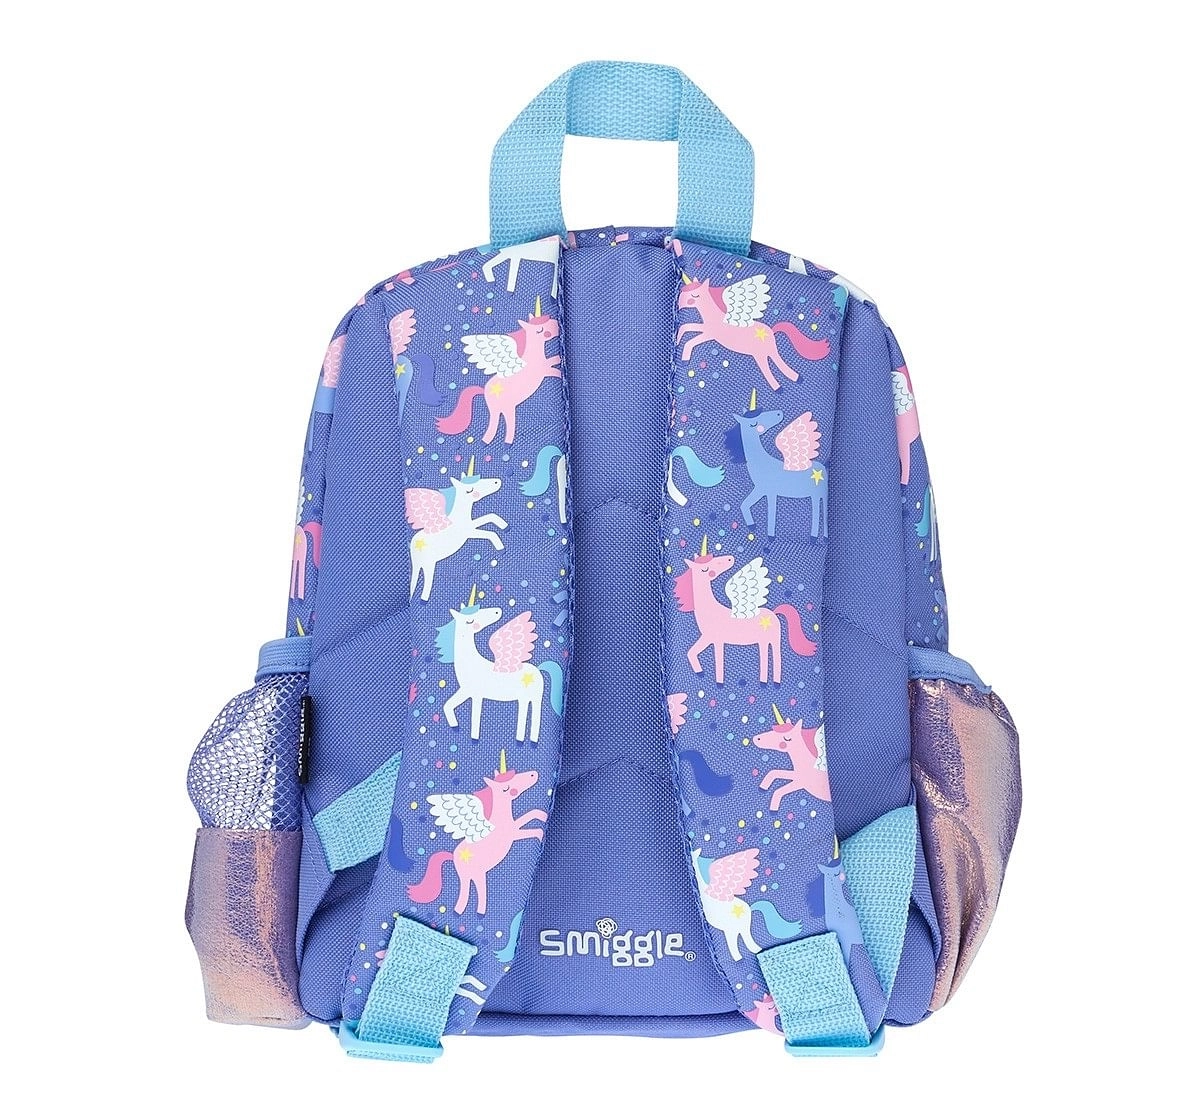 Authentic Australian Smiggle School Bag 20th Anniversary Primary School  Girl Lightweight Large Capacity Backpack Lunch Box